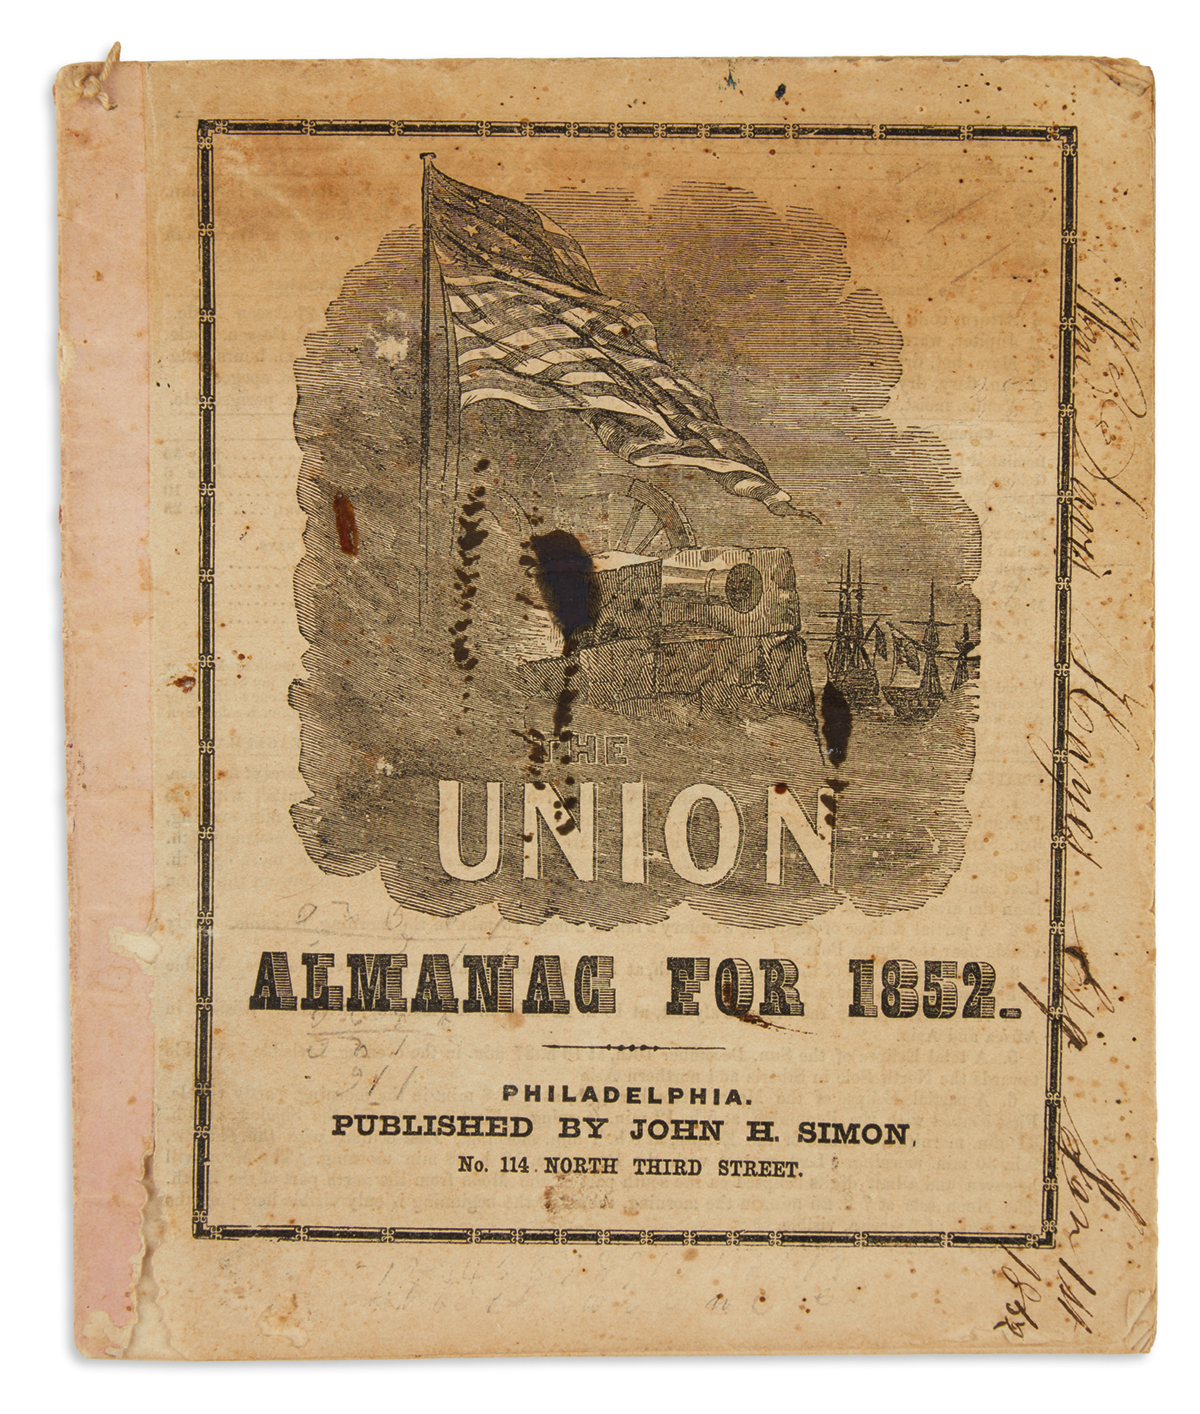 (SLAVERY AND ABOLITION.) The American Anti-Slavery Almanac for 1839.